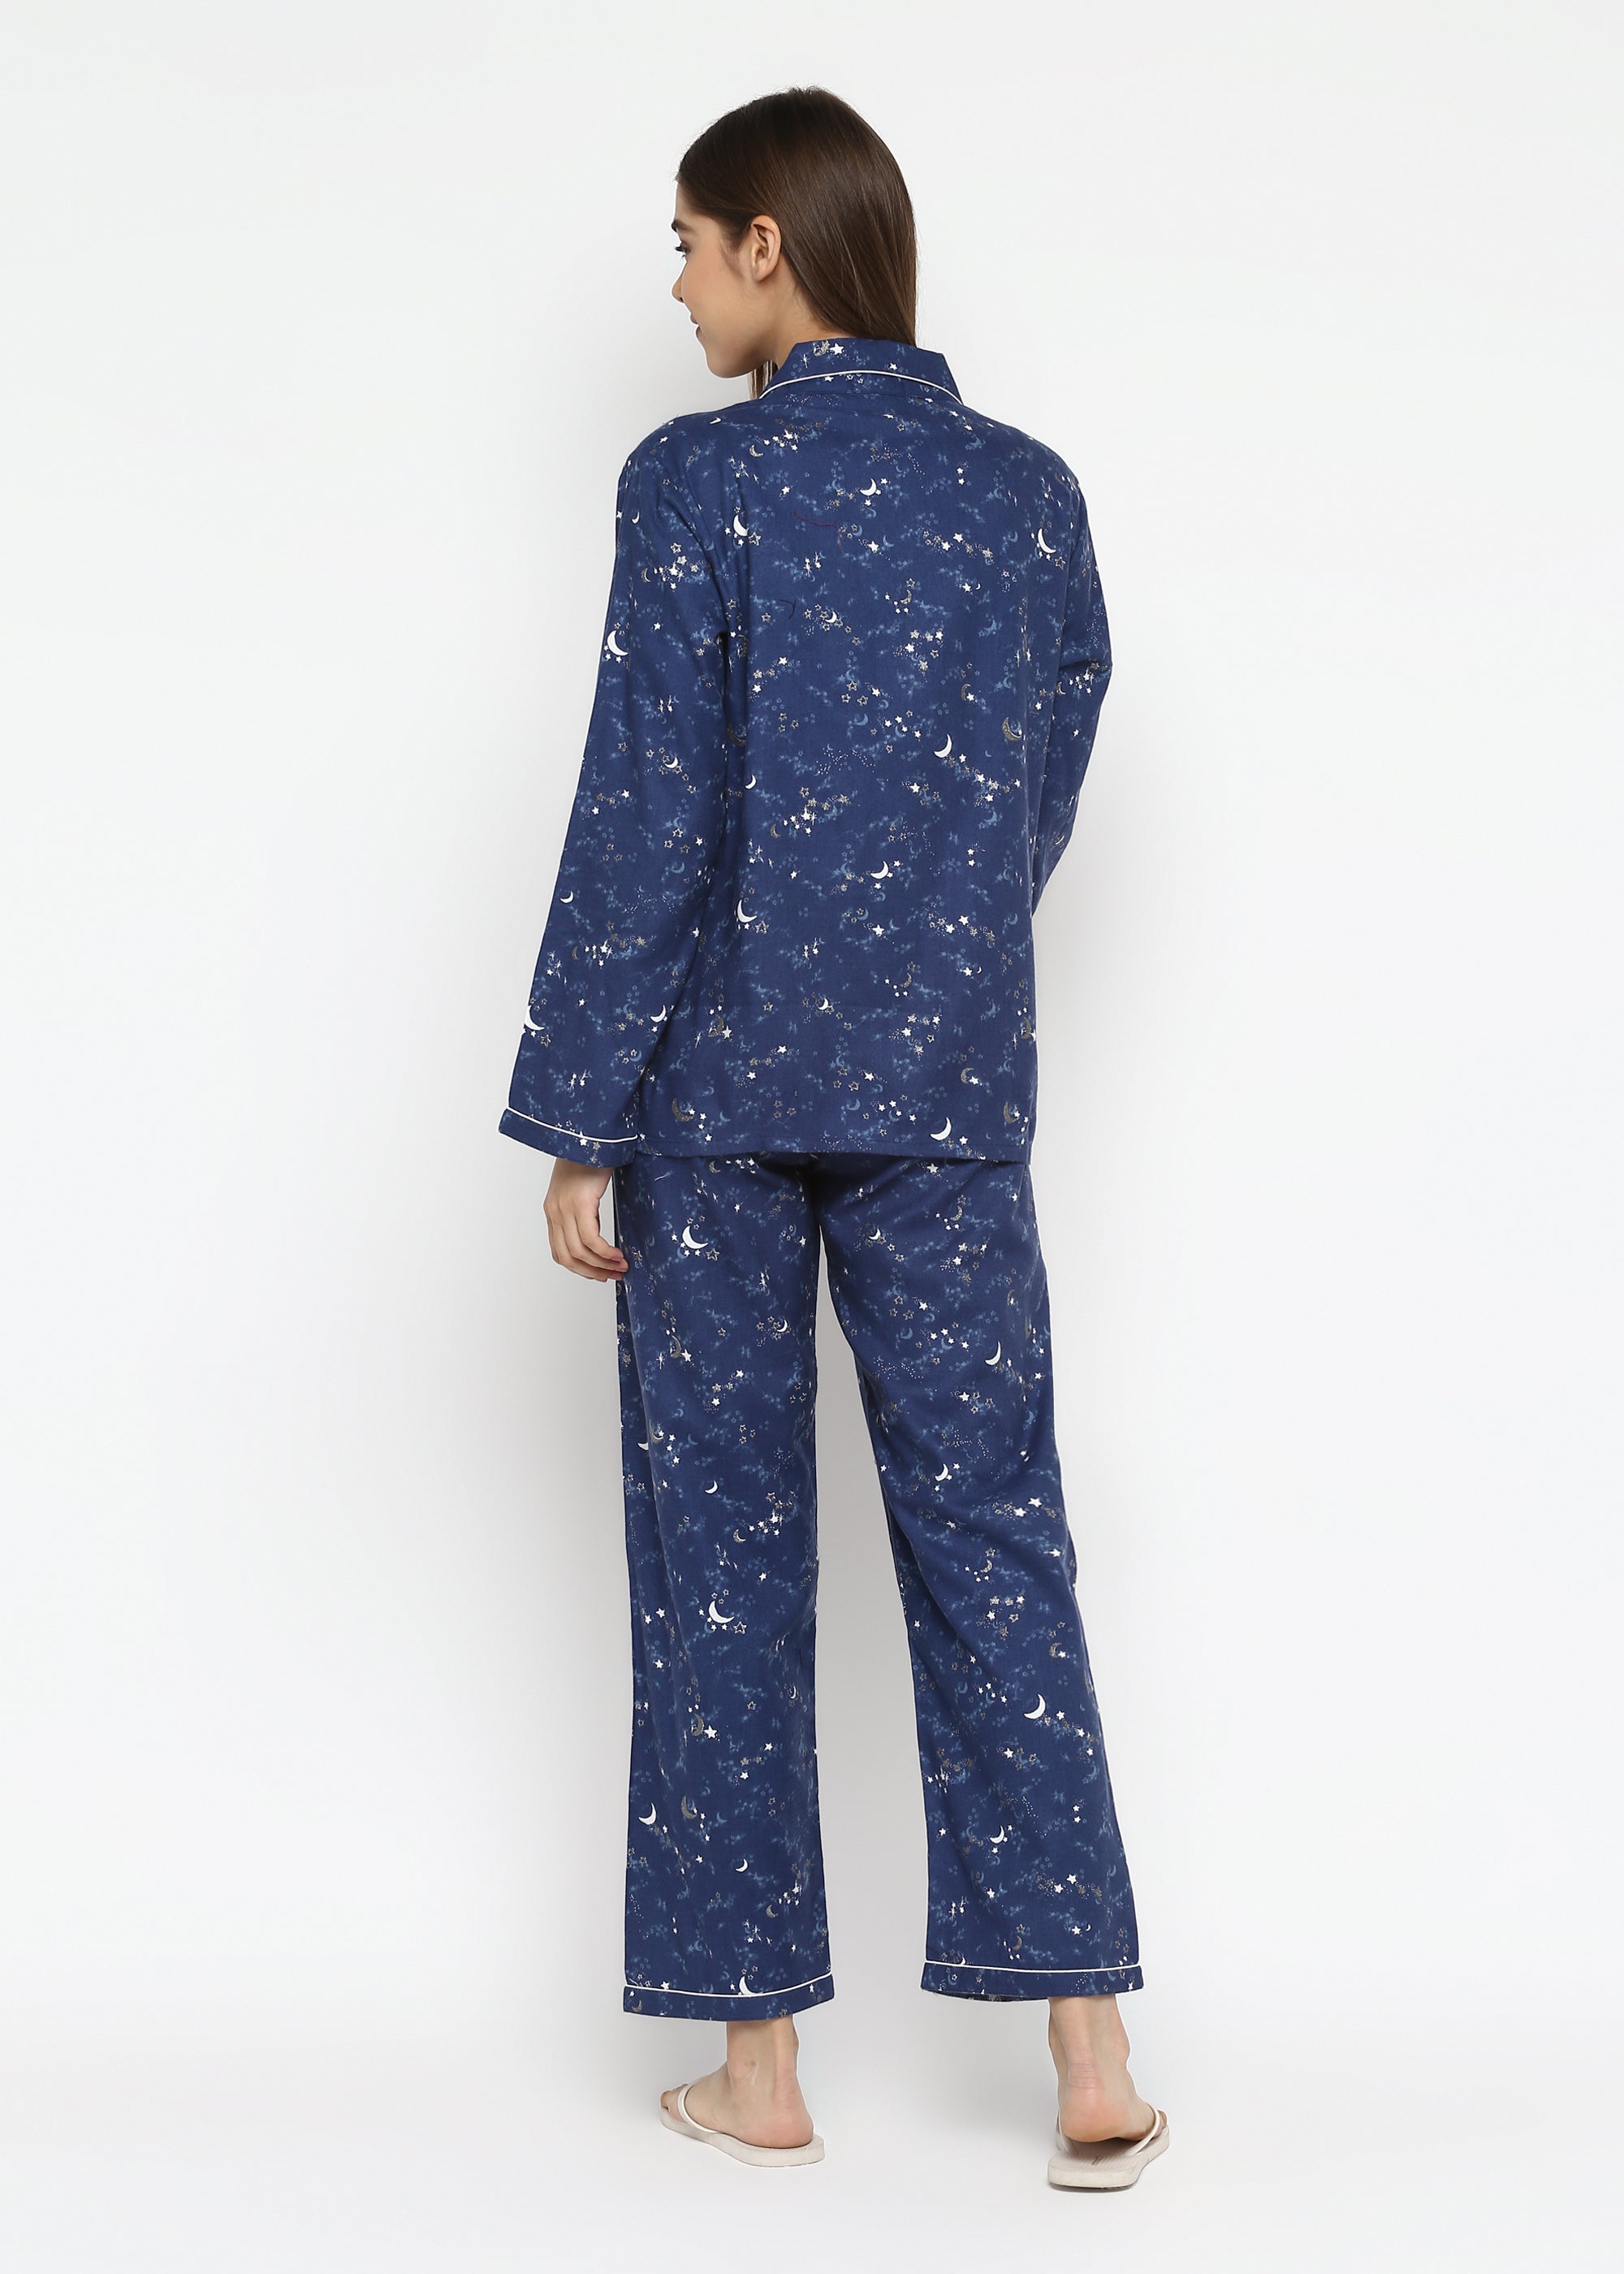 Blue Star and Moon Print Cotton Flannel Long Sleeve Women's Night Suit - Shopbloom